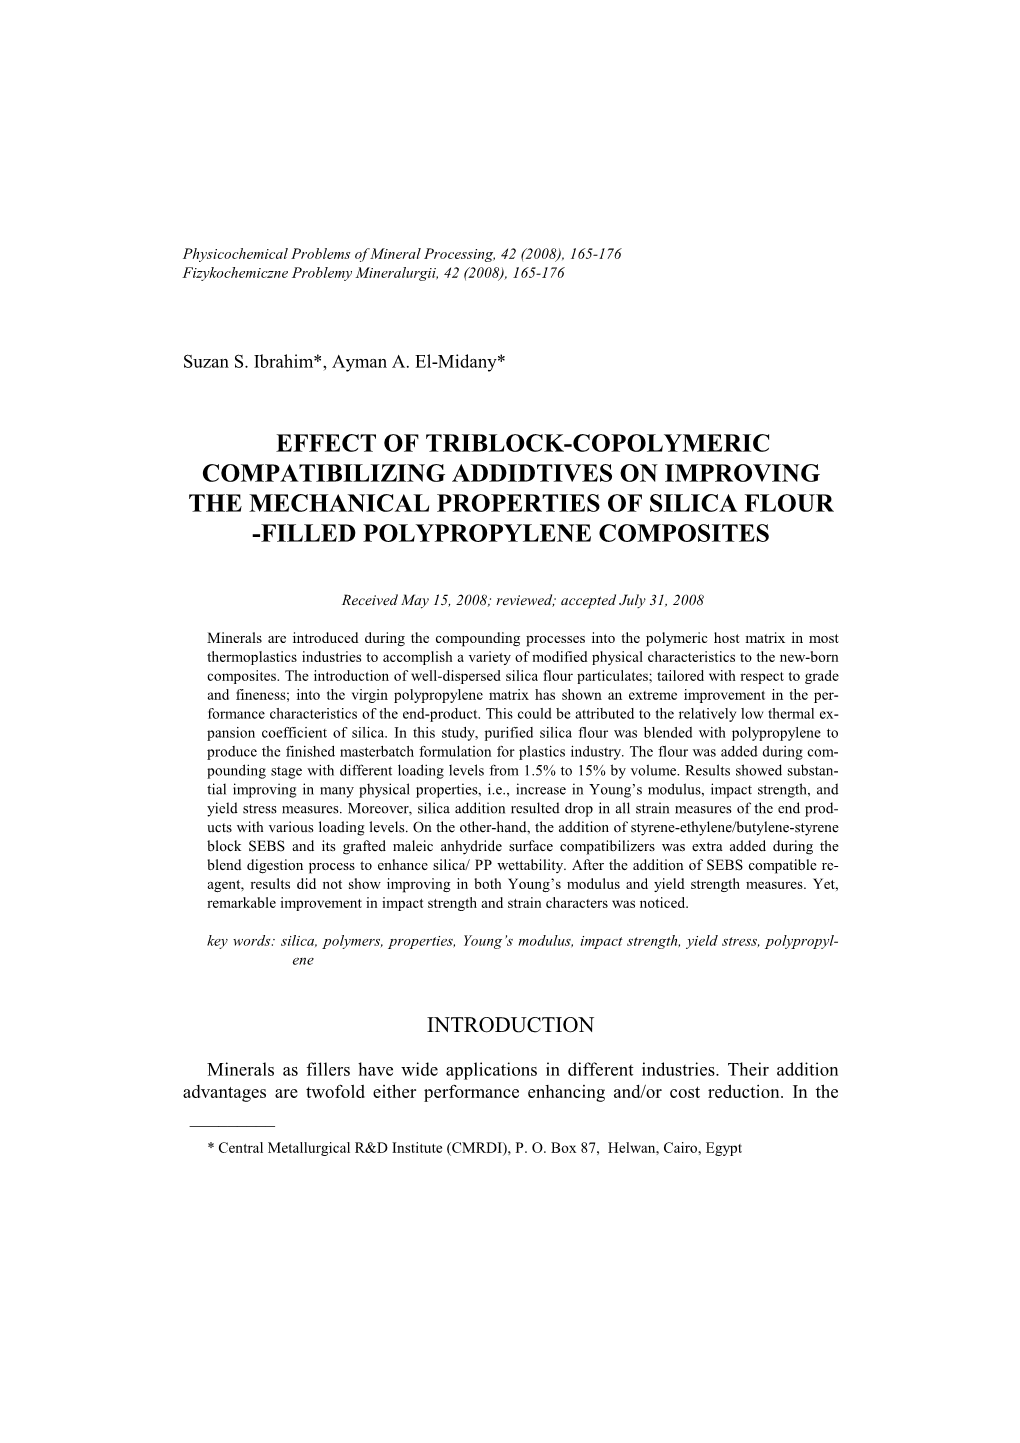 Effect of Triblock-Copolymeric Compatibilizing Addidtives on Improving the Mechanical Properties of Silica Flour -Filled Polypropylene Composites